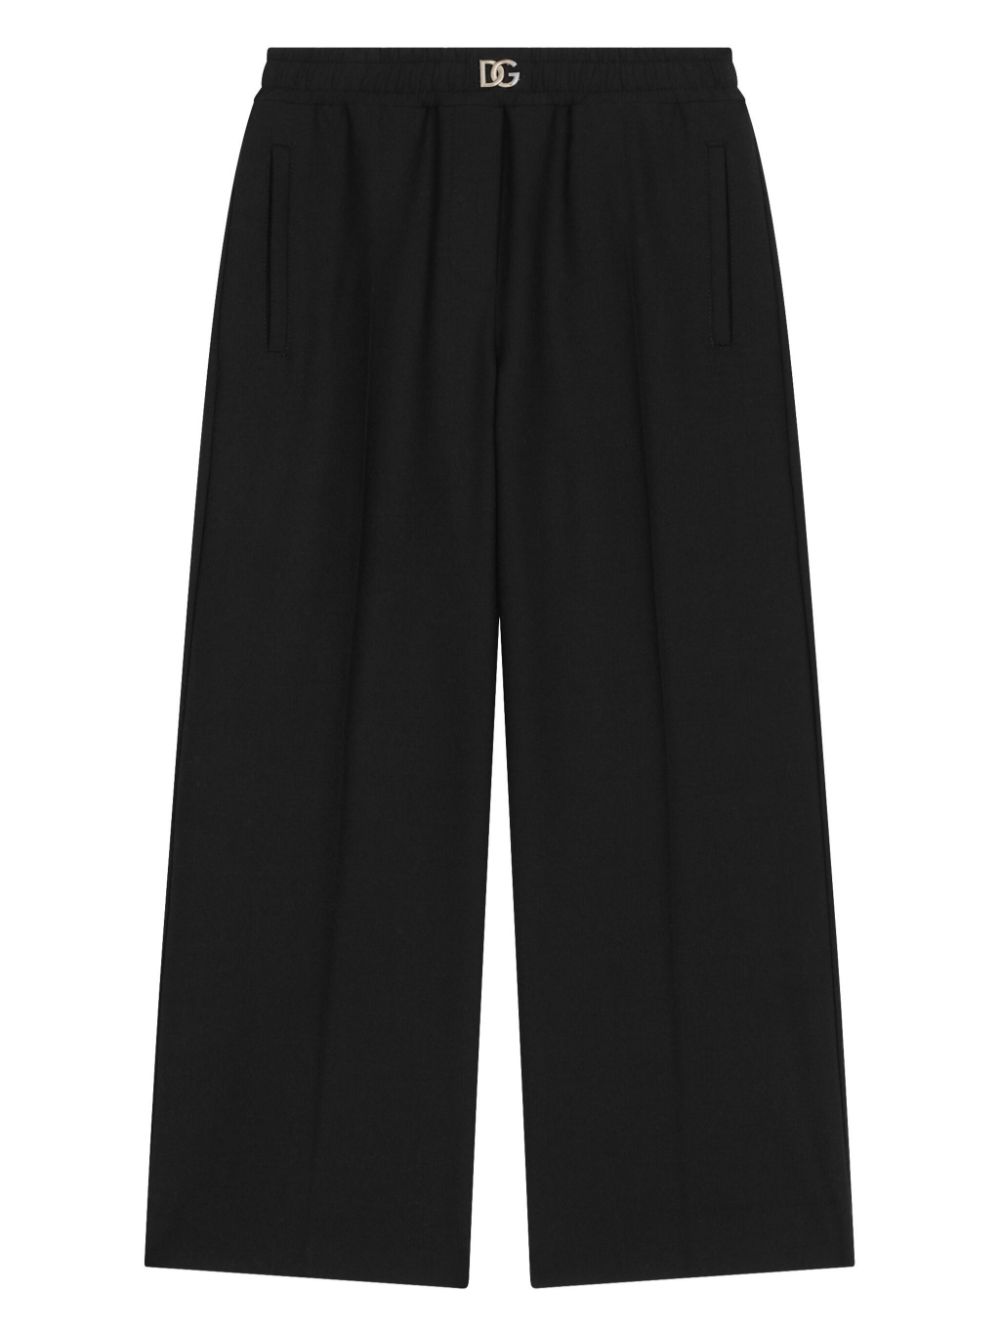 Black trousers for girls with logo plaque